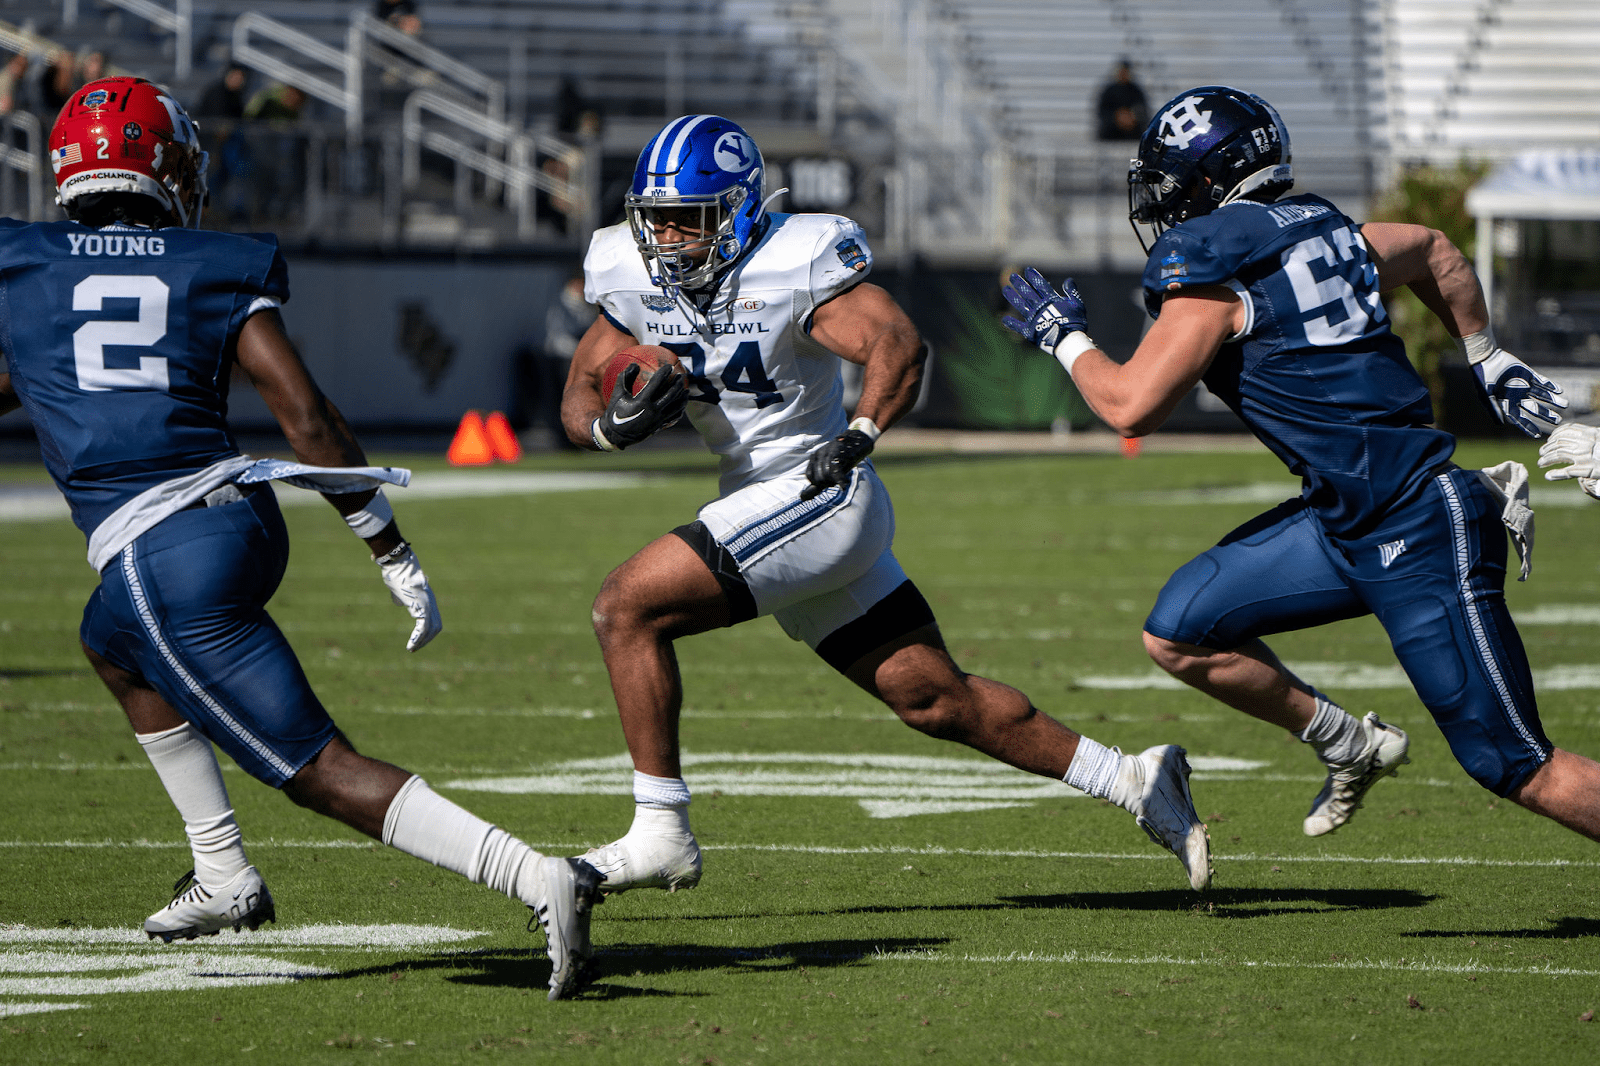 Christopher Brooks is a powerful downhill runner out of BYU who separated himself as the Offensive MVP at the 2023 Hula Bowl. Mike Bey breaks down Brooks as an NFL Prospect in his most recent scouting report.